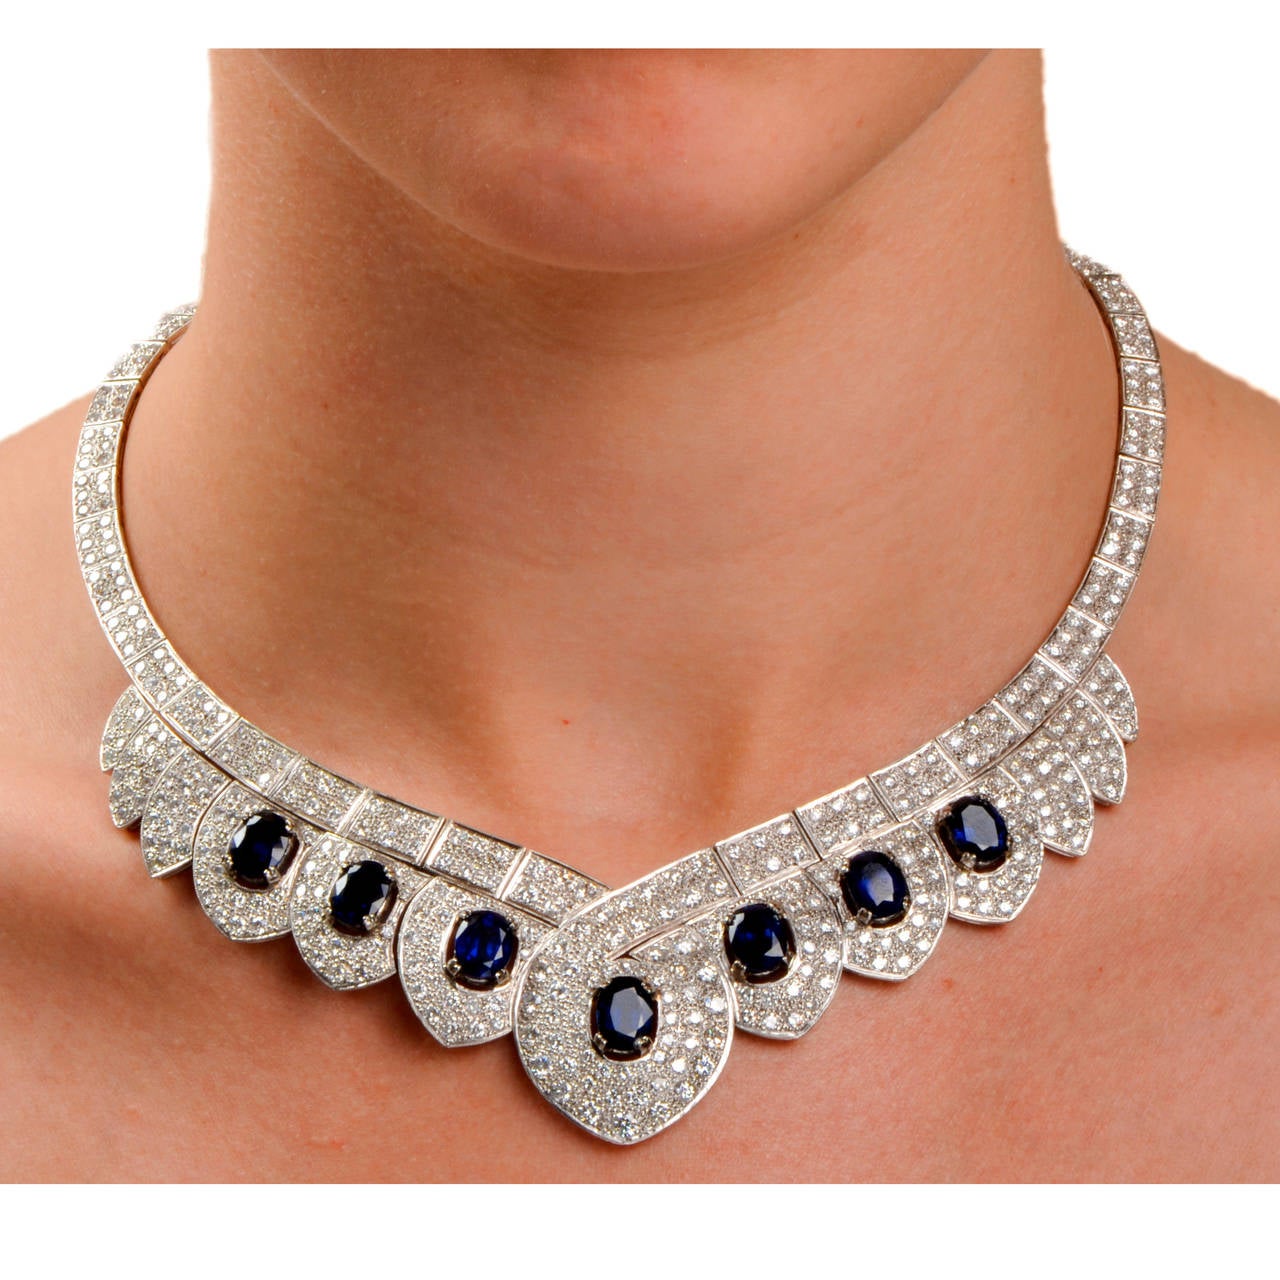 This choker necklace of opulent, color contrasted and luxurious aesthetic is crafted in platinum, weighing approx. 77.9 grams and measuring 17.5